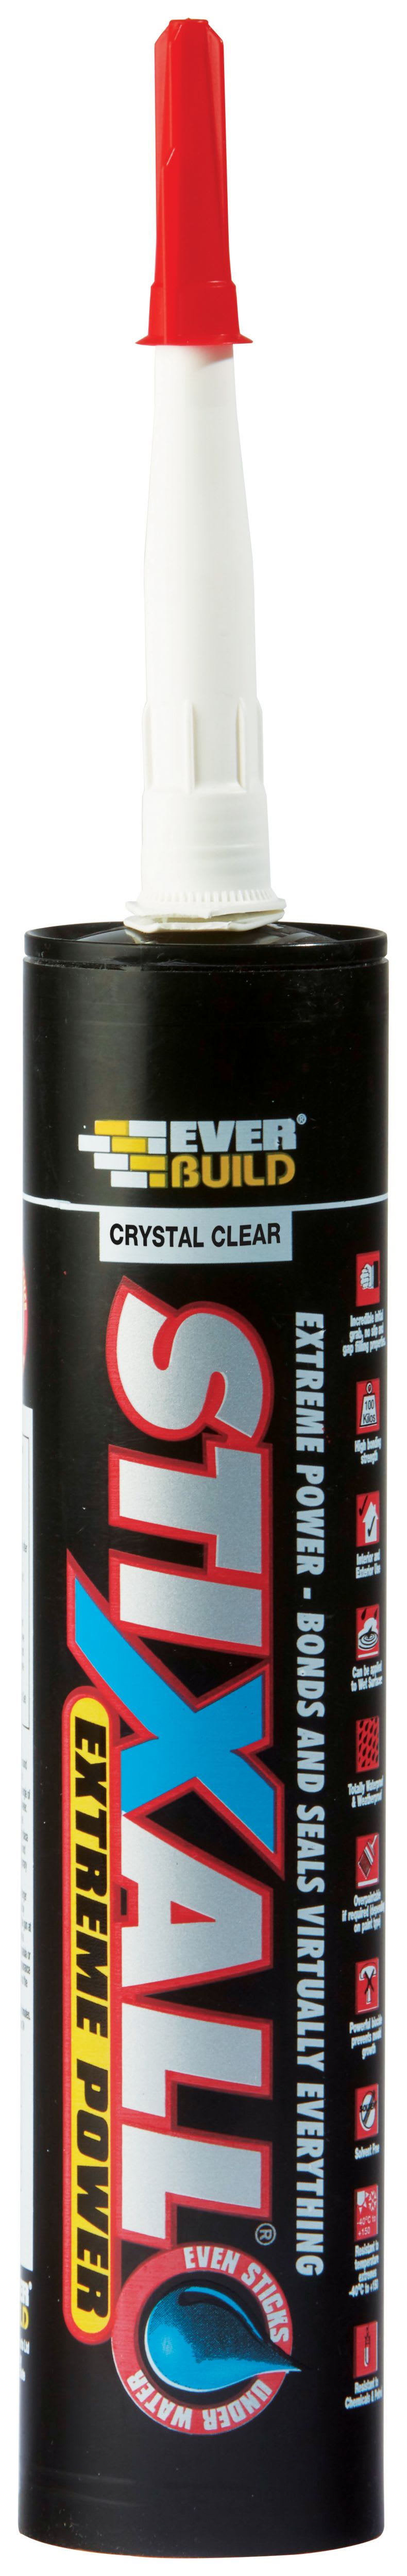 Everbuild Crystal Clear Stixall Extreme Power Sealant &